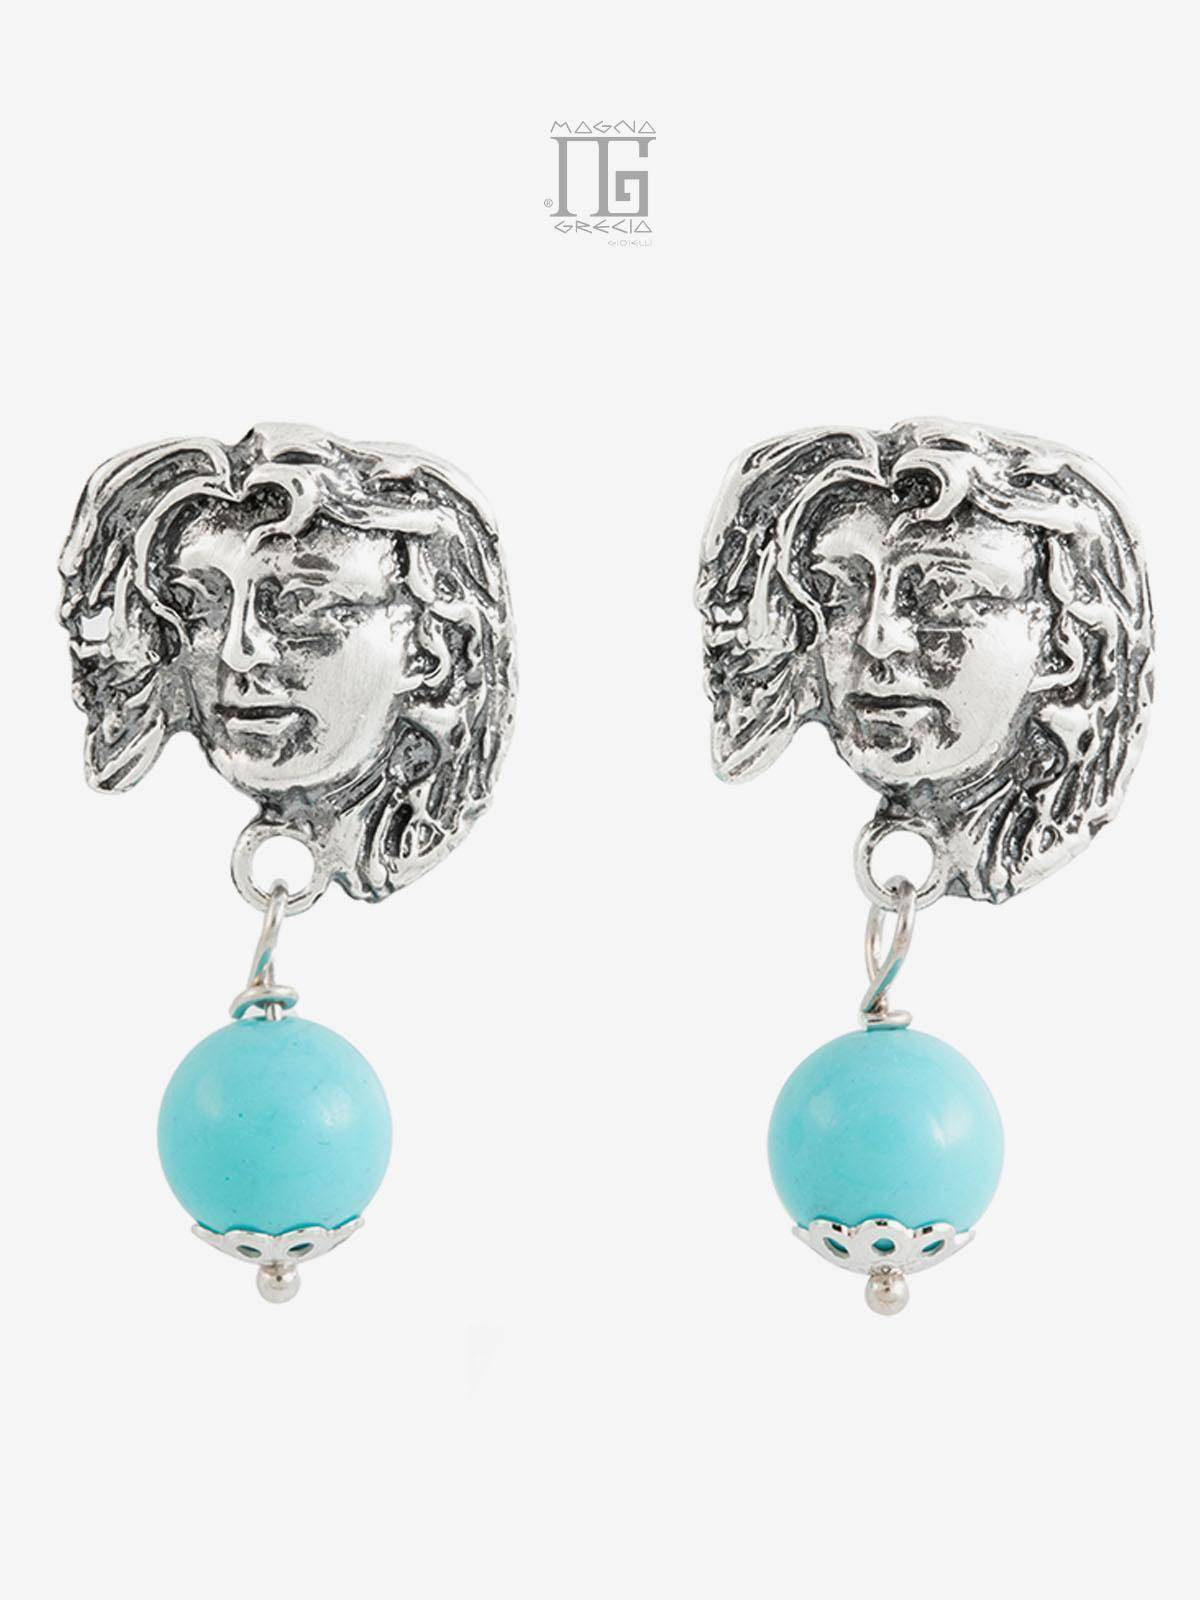 “Love” earrings in silver depicting the face of the goddess Venus and turquoise paste stone Cod. MGK 3852 V-1